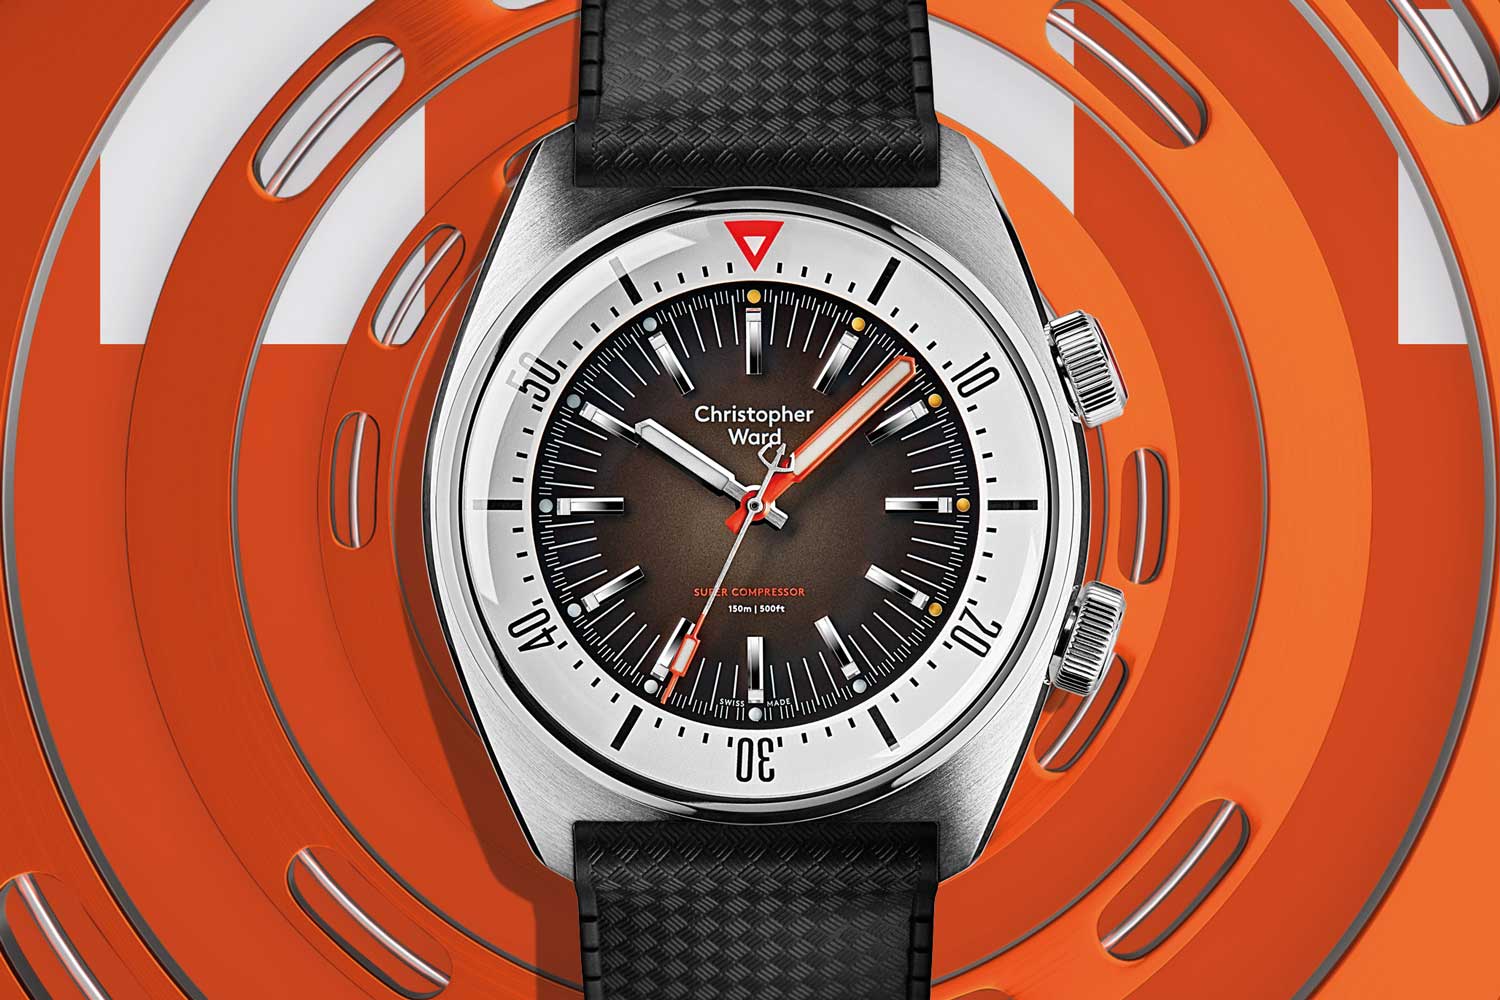 Christopher Ward’s new C65 is a super compressor dive watch based on a 1950s patent